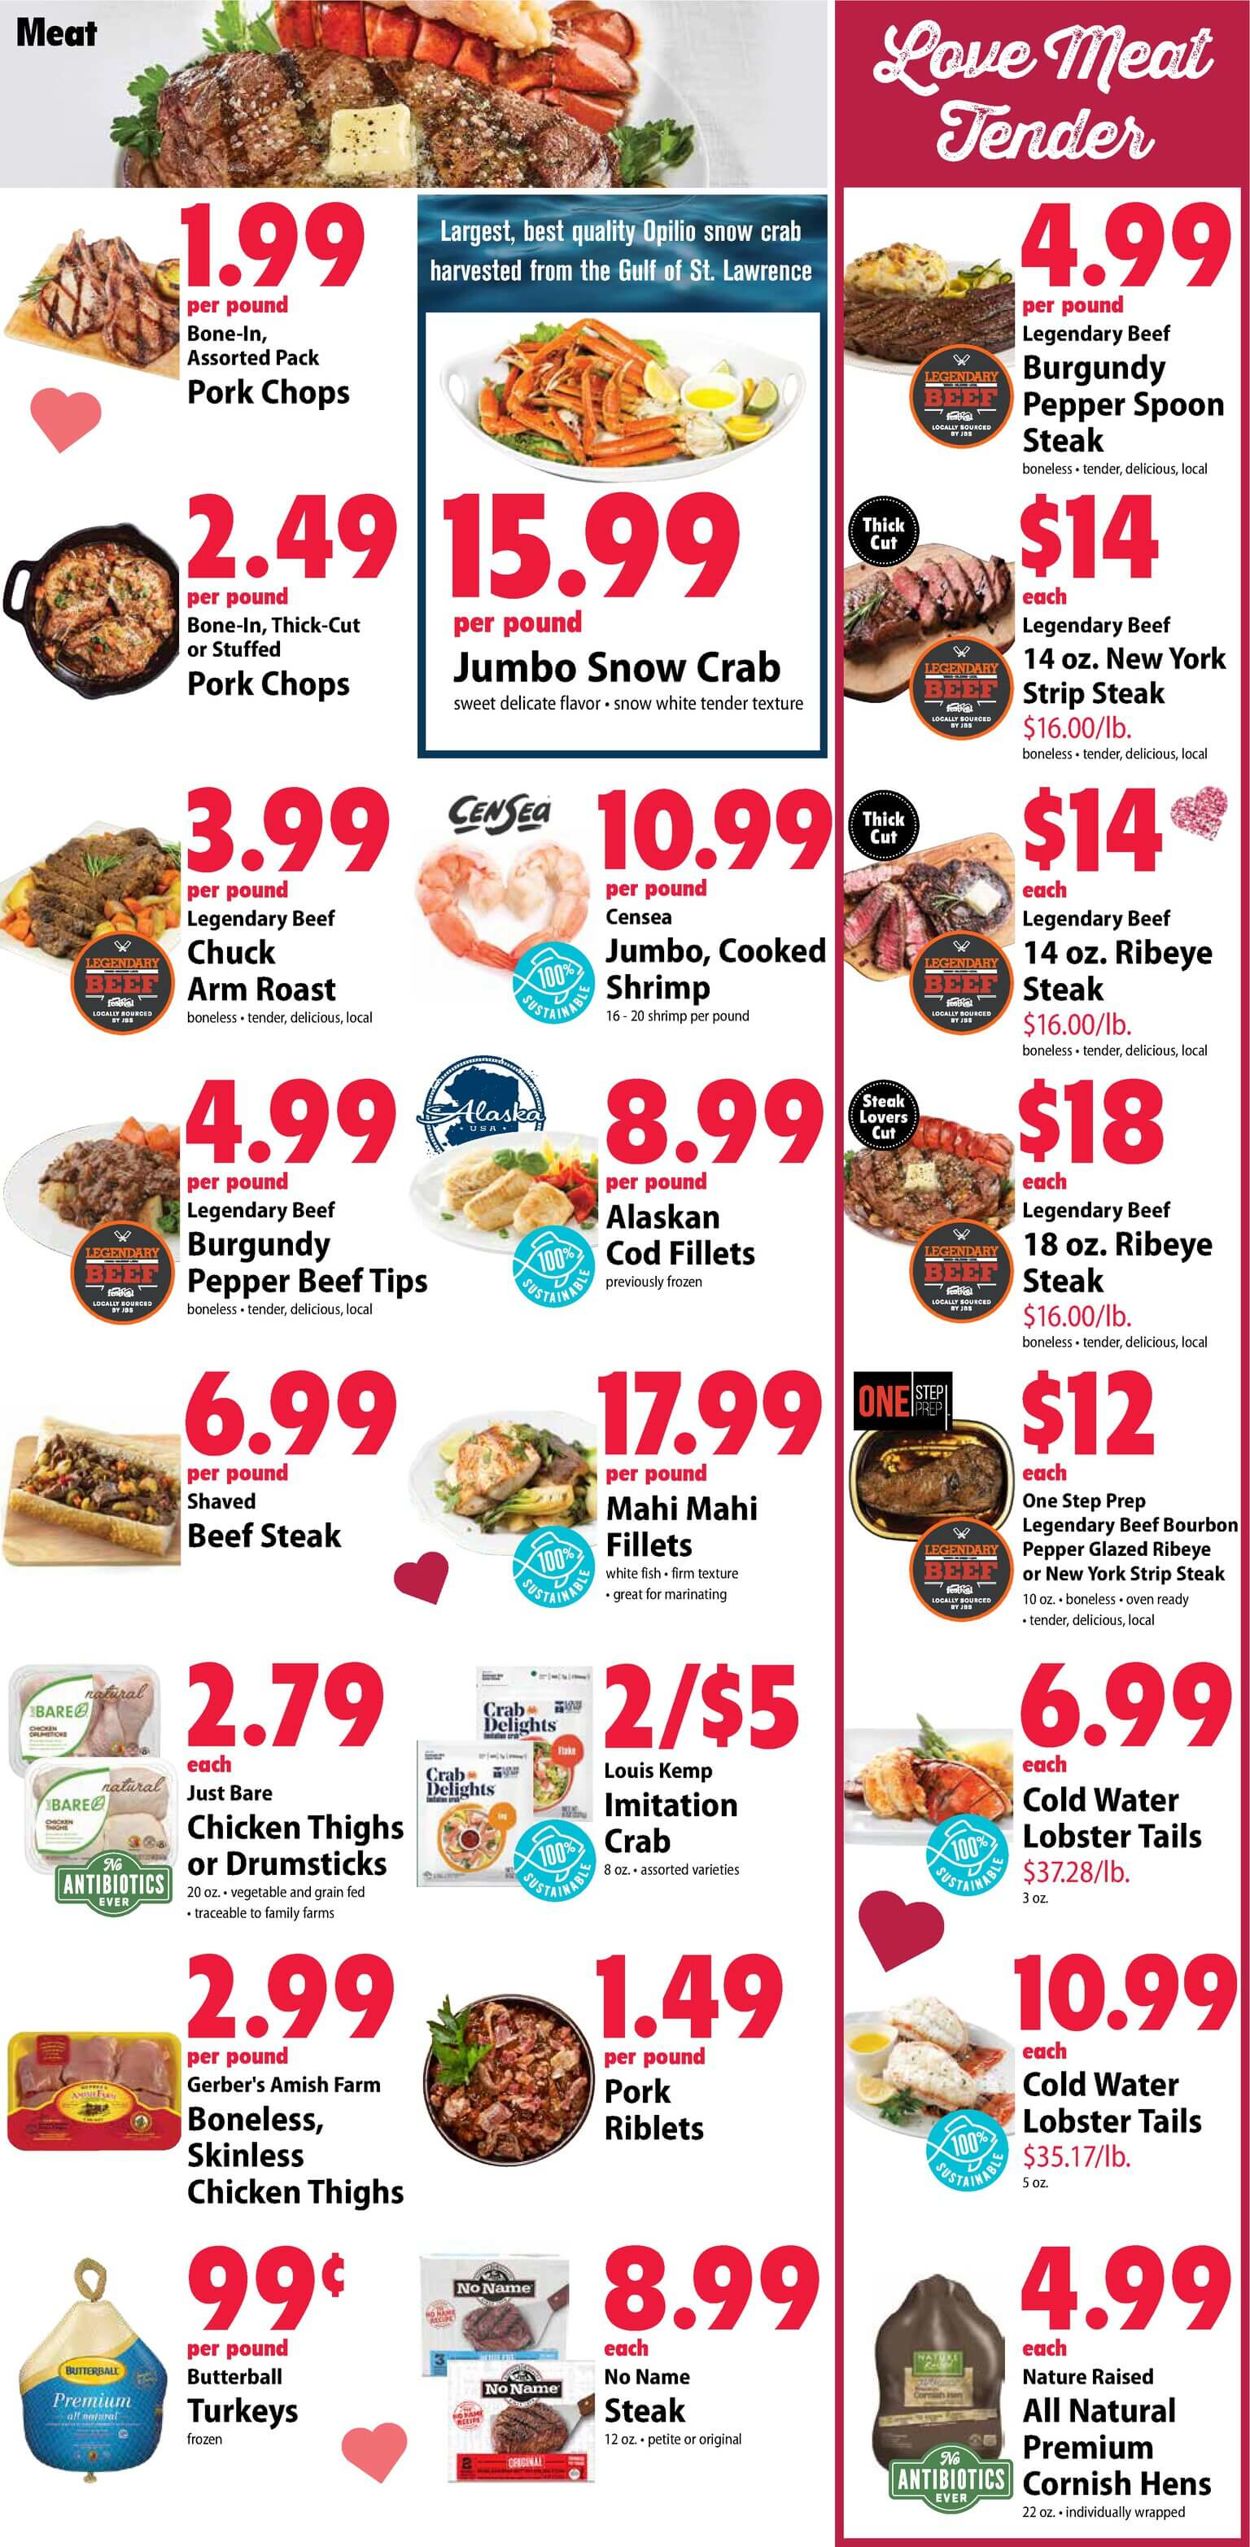 Festival Foods Current weekly ad 02/12 02/18/2020 [3]